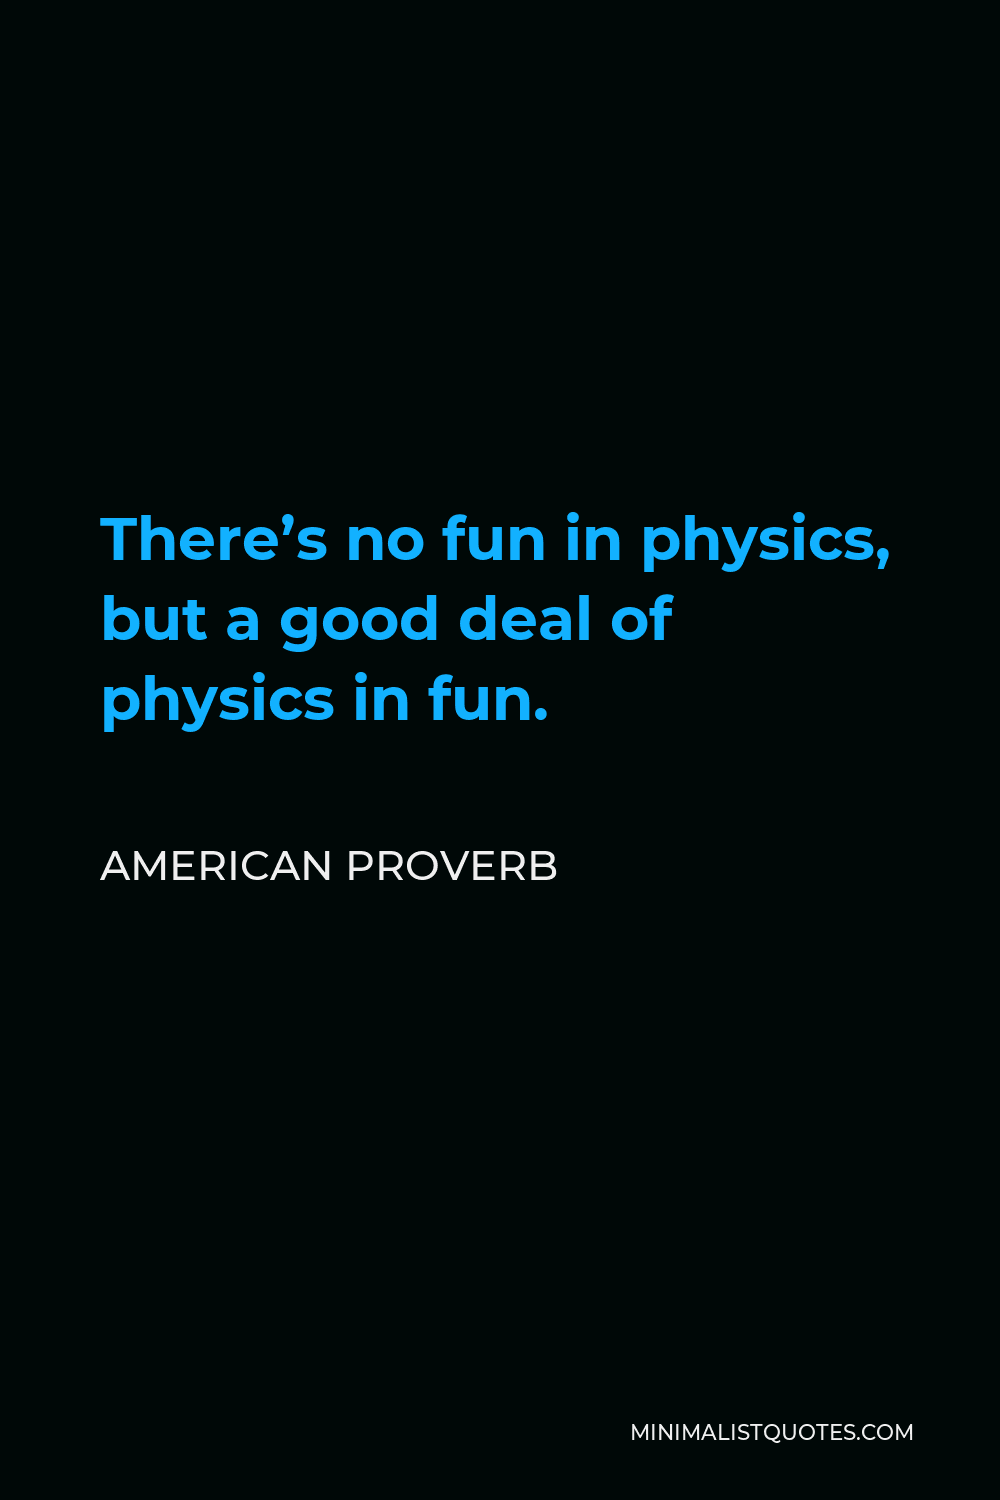 American Proverb Quote - There’s no fun in physics, but a good deal of physics in fun.